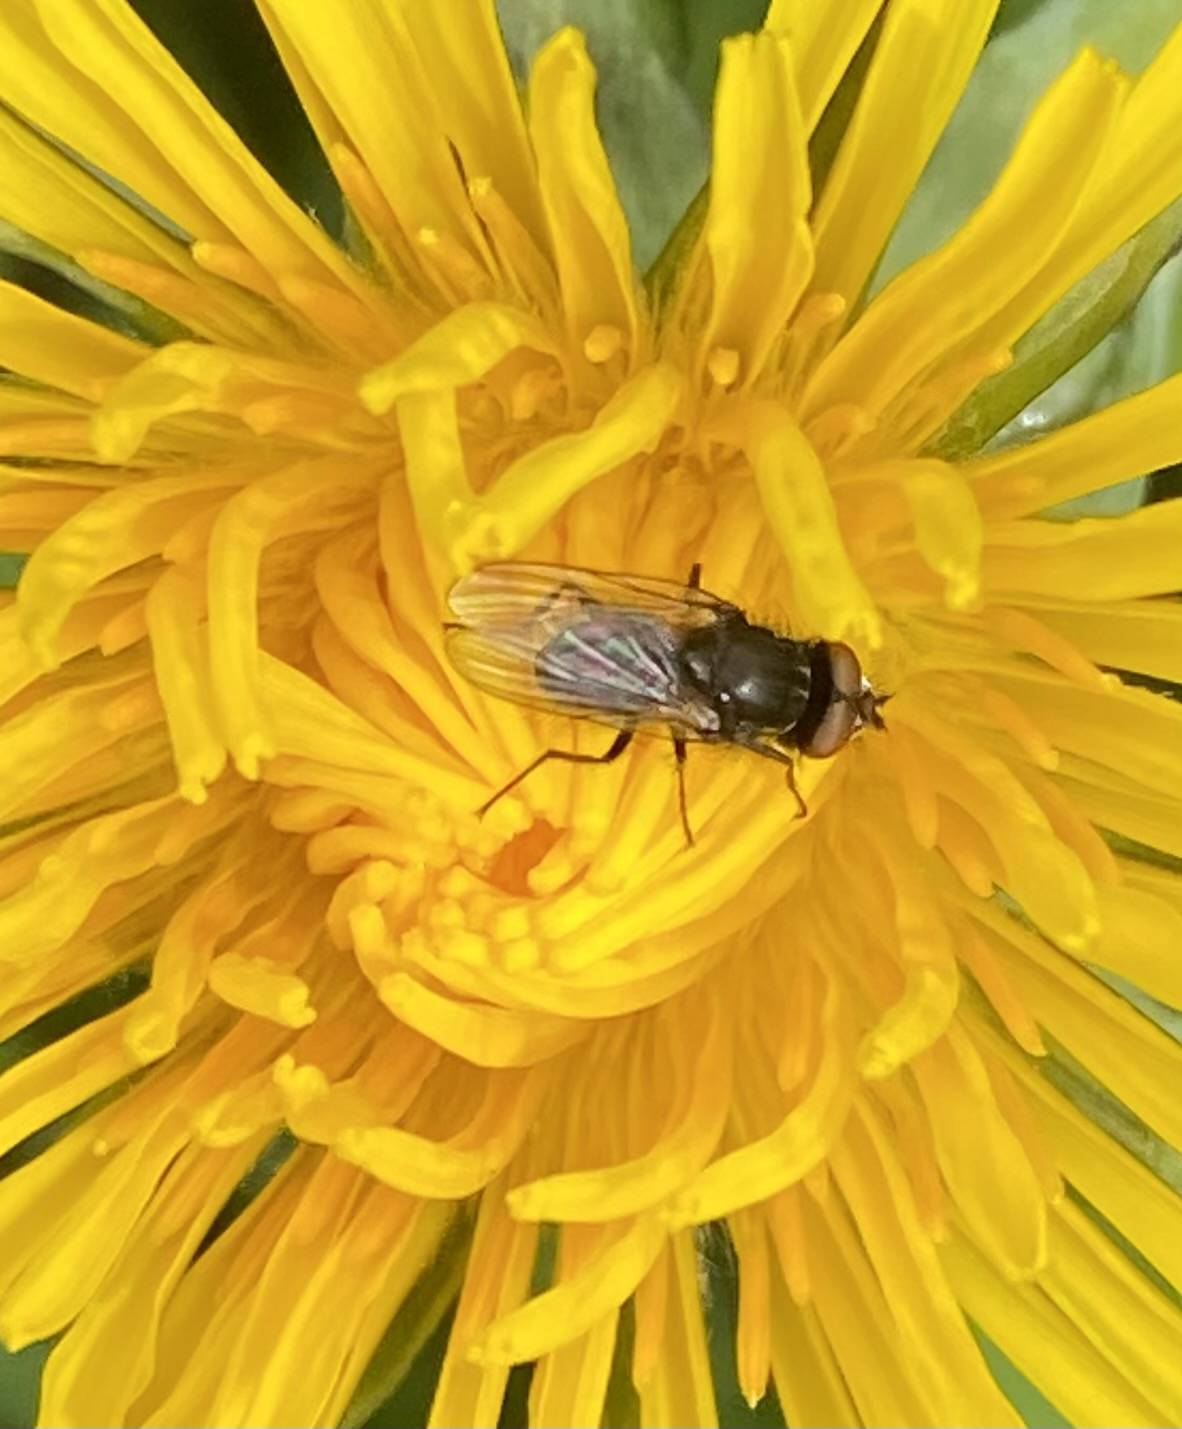 n insect weaves its way through the yellow maze of a roadside dandelion on June 4. (Courtesy Photo / Denise Carroll)